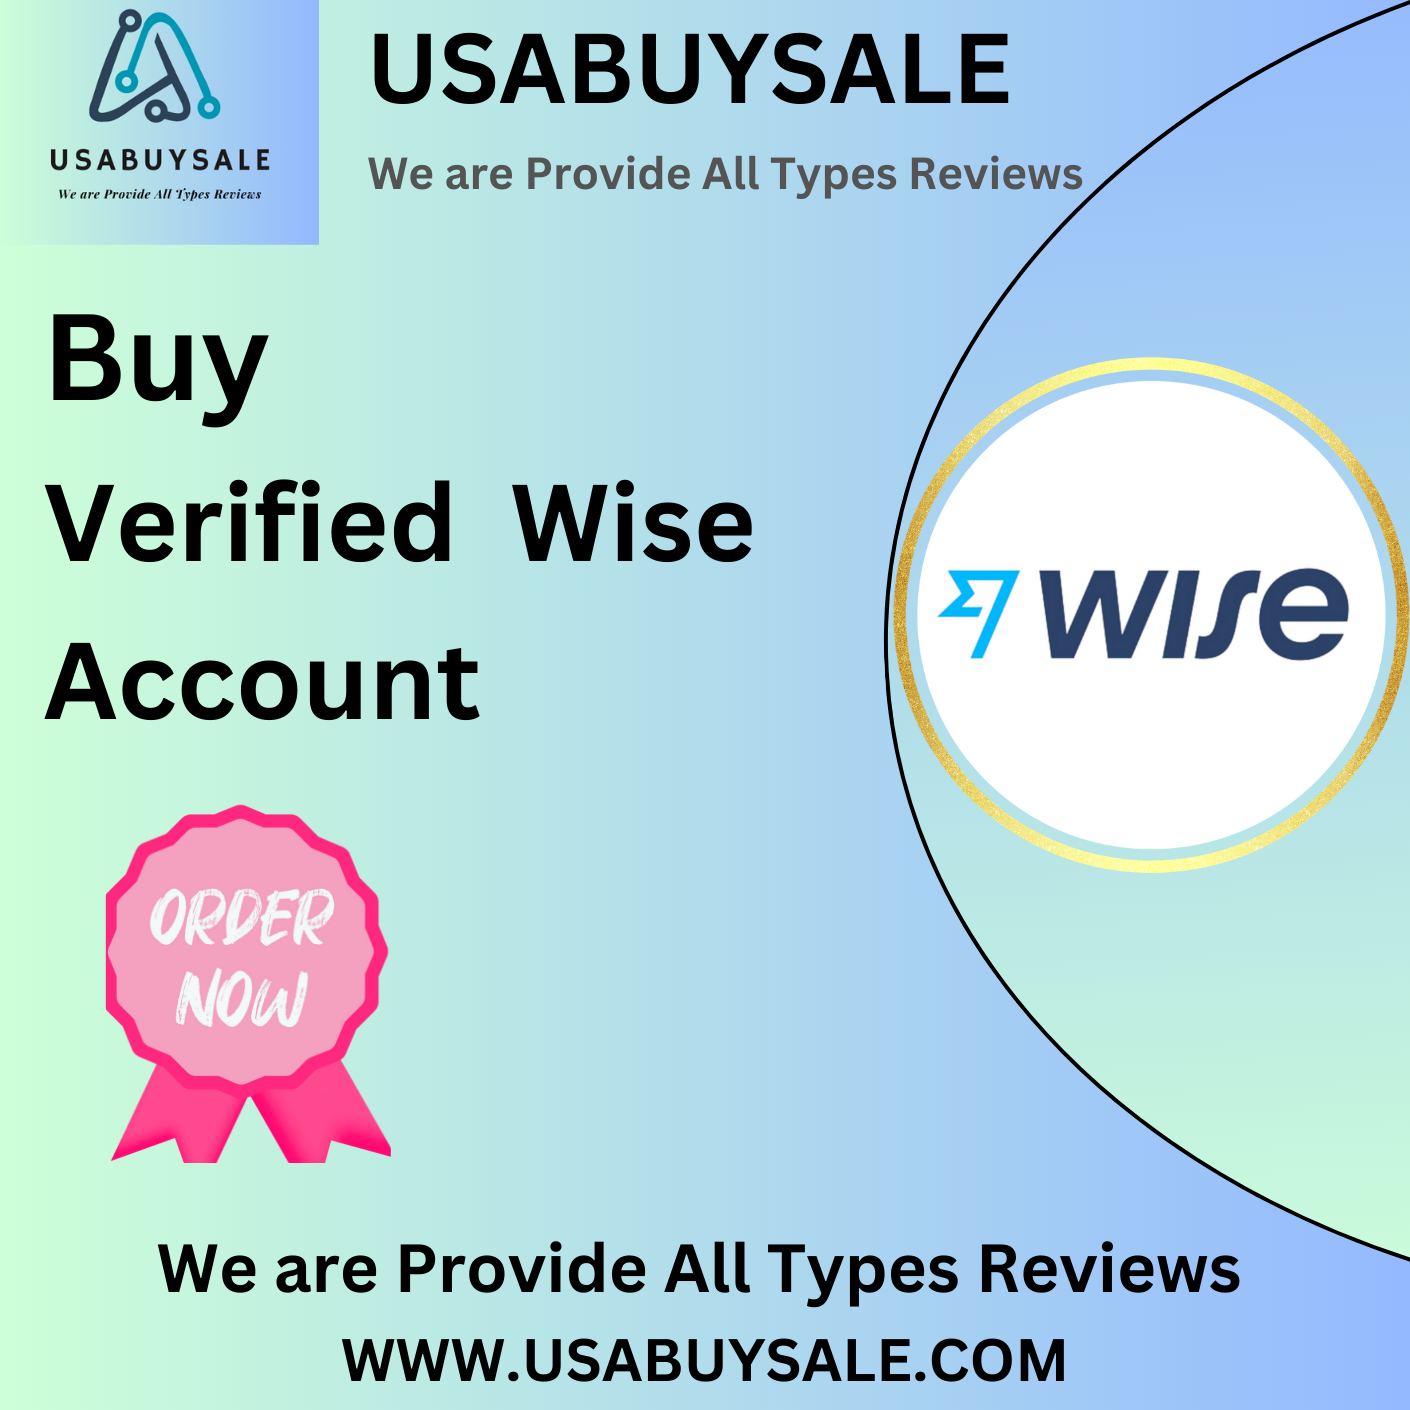 Buy Verified Wise Account - 100% USA WISE ACCOUNT